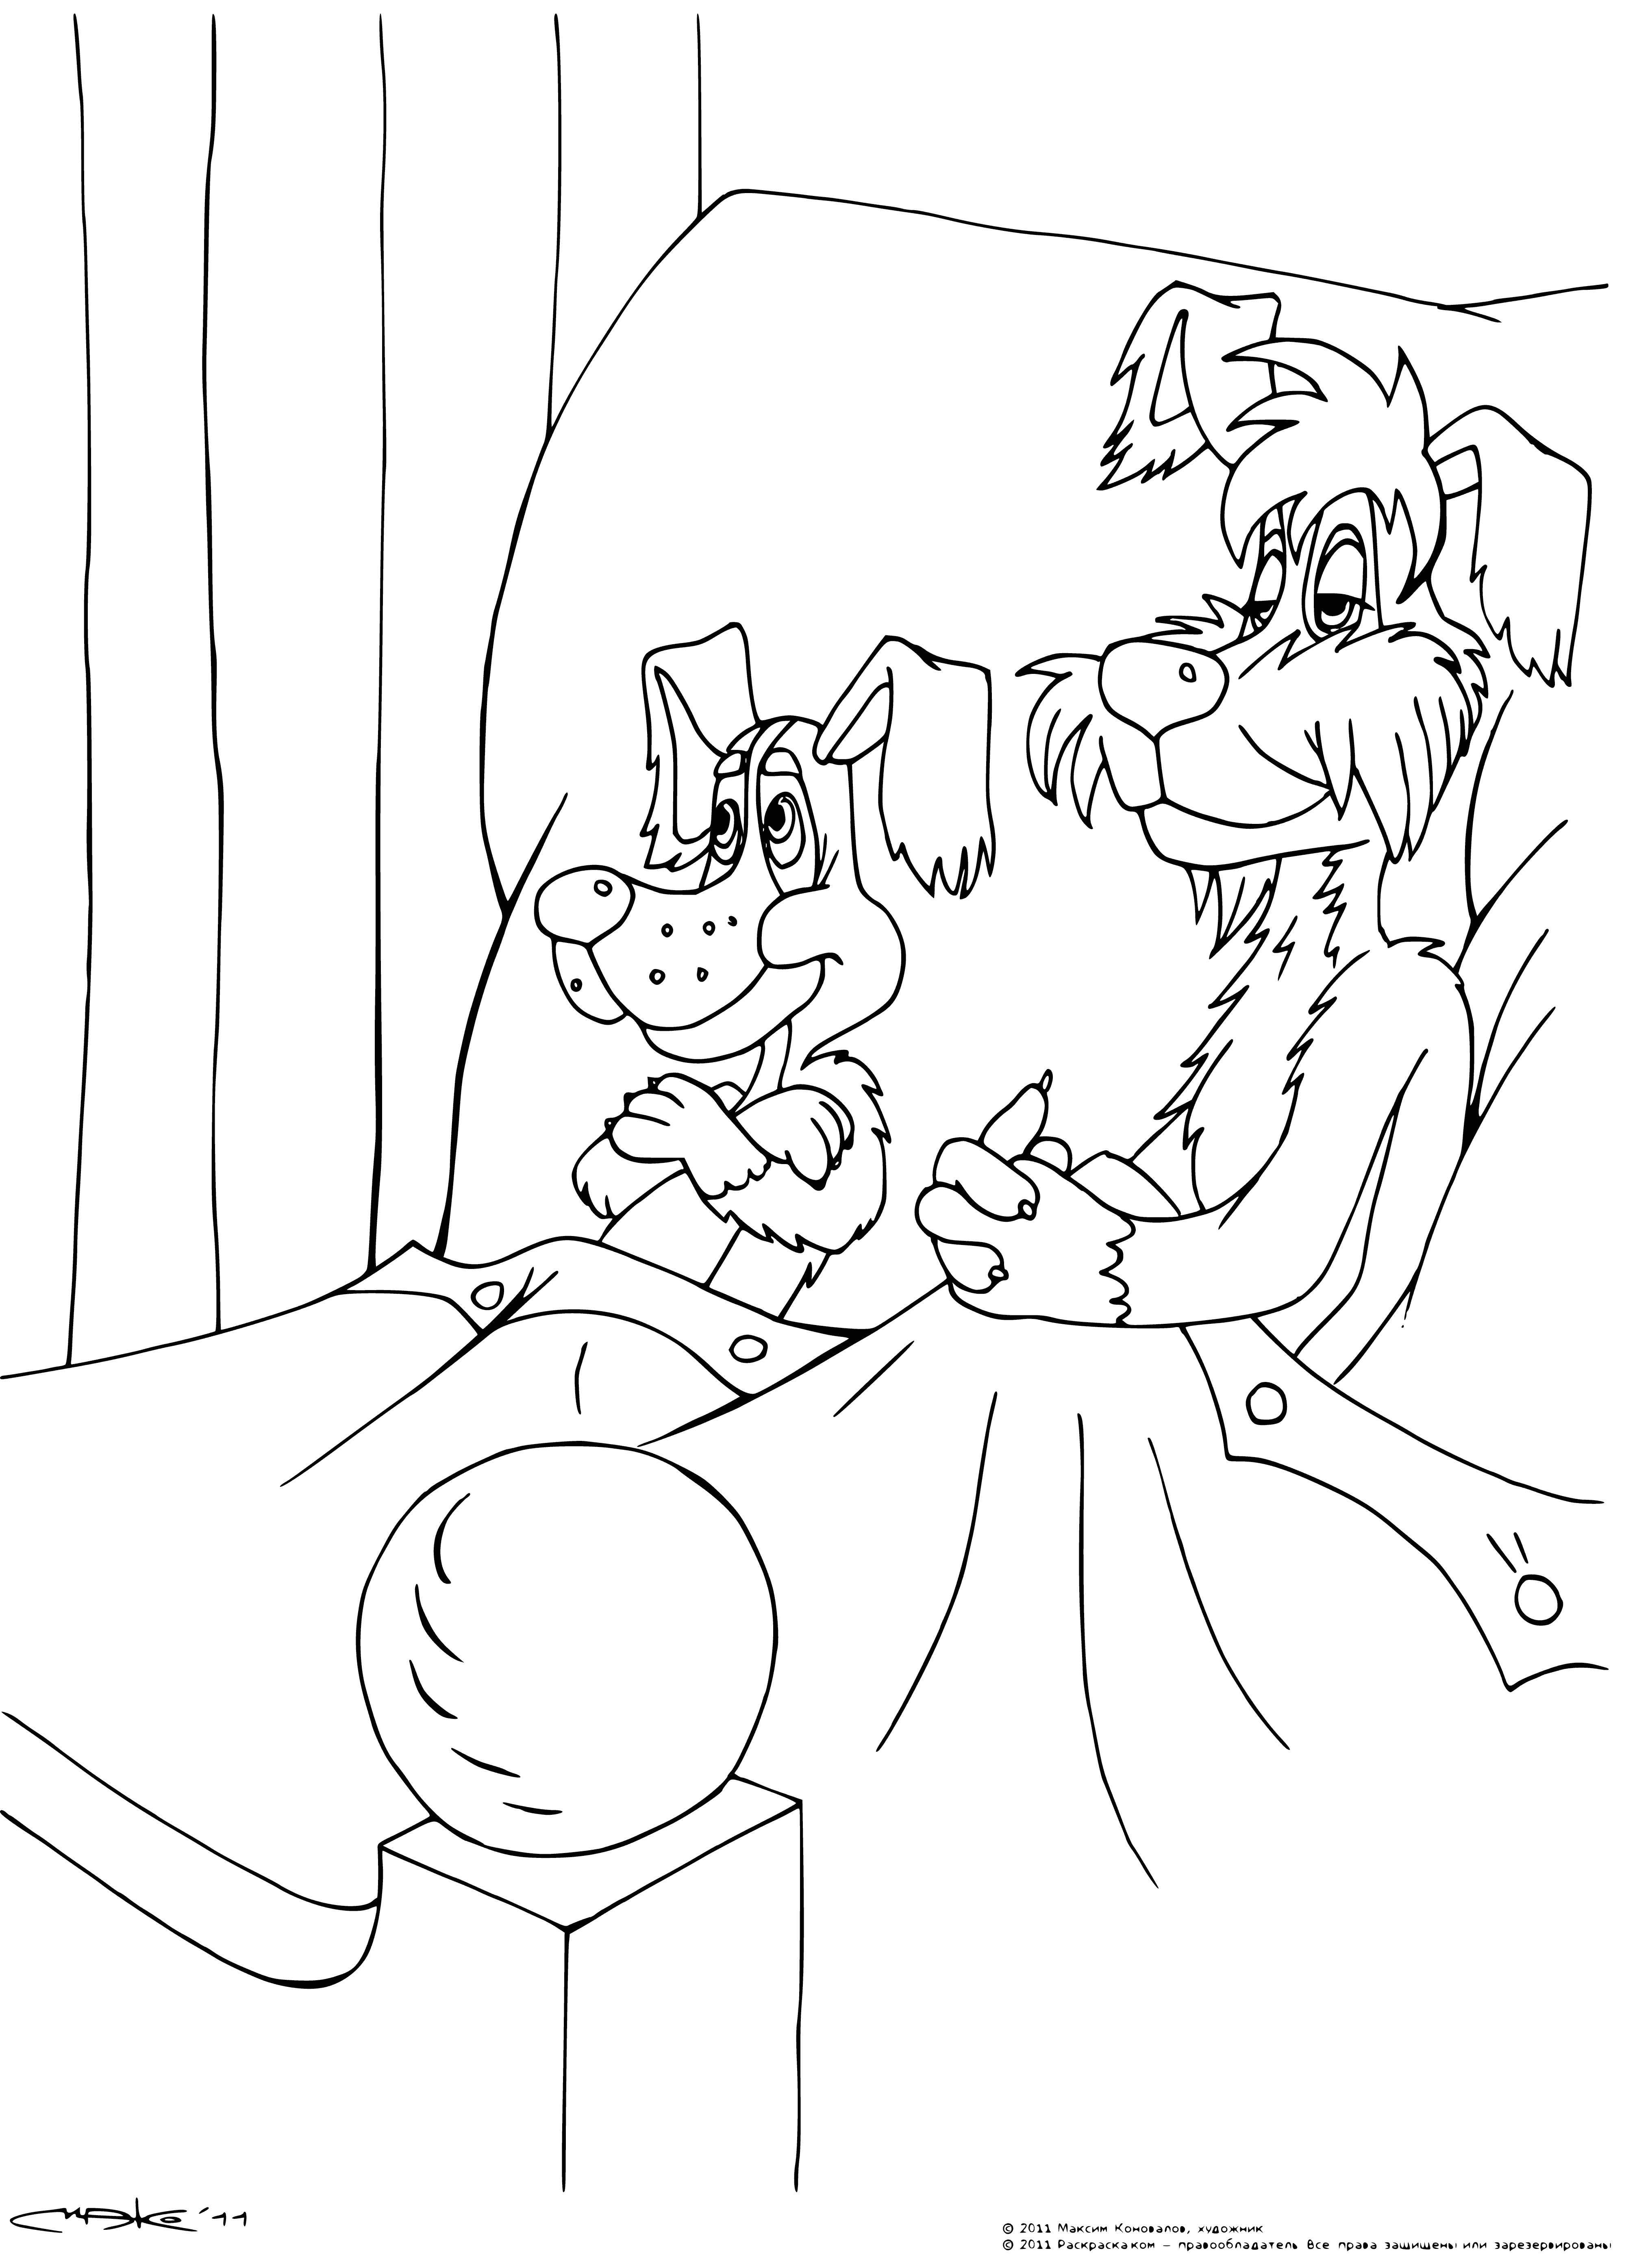 coloring page: Bobik, a pooped pup, visits Barbos, a cat dozing on a comfy couch.